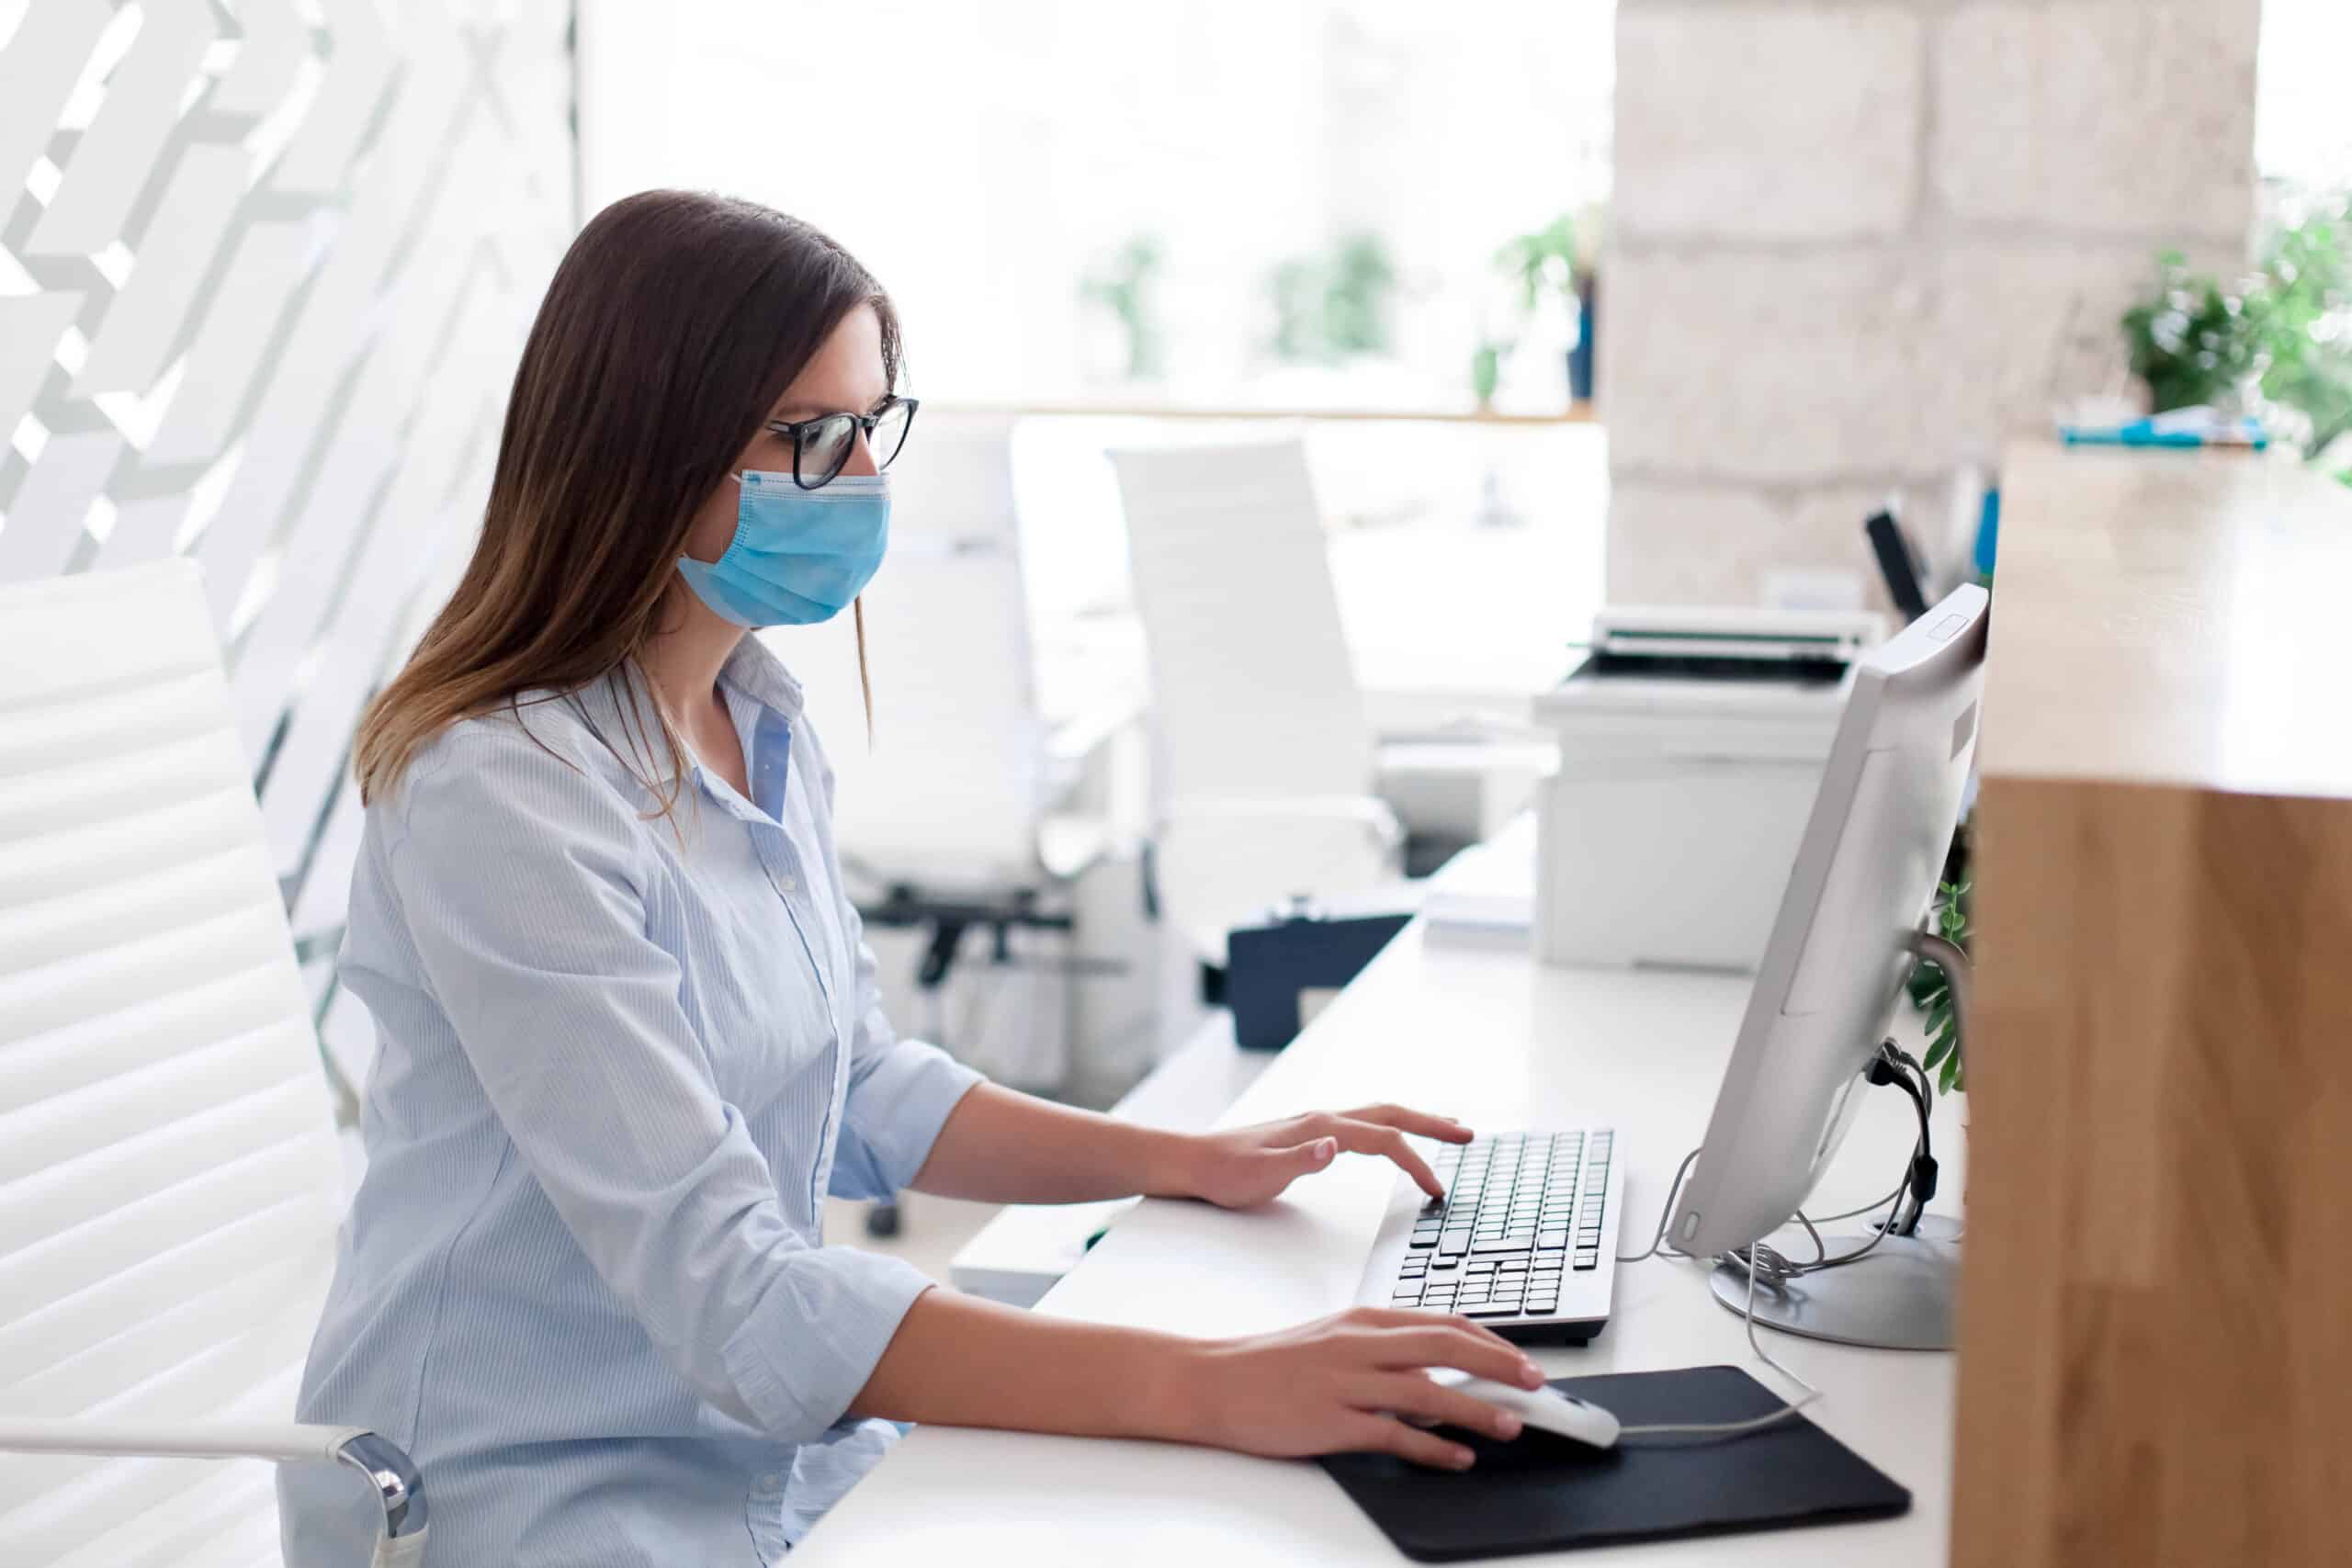 Young woman wearing medical mask in office.